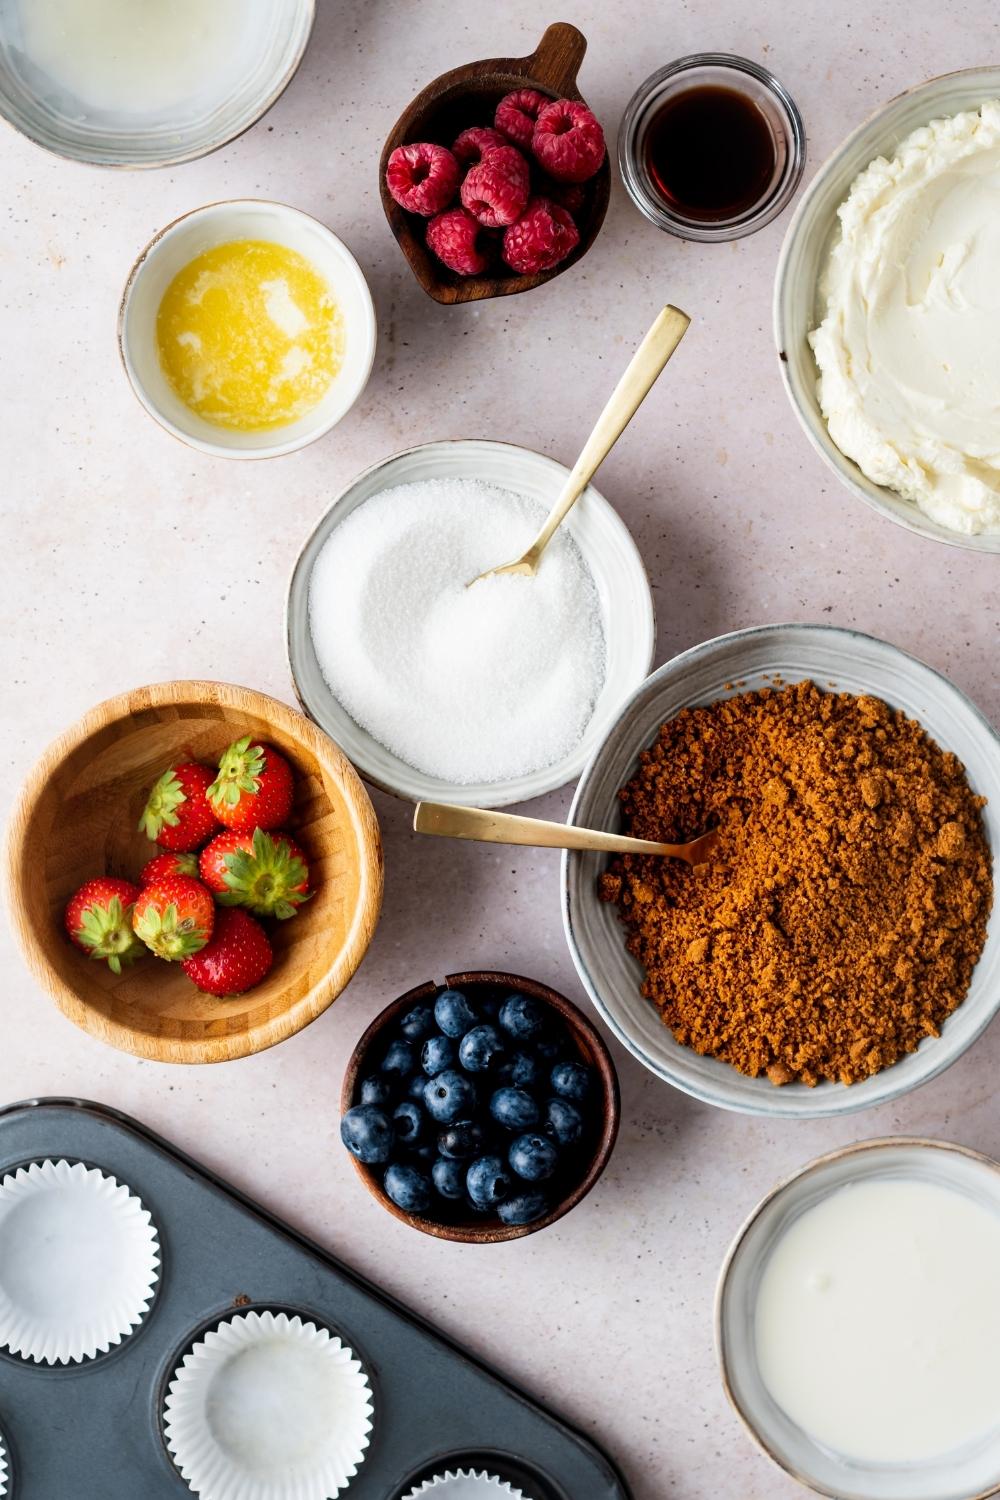 An overhead view of the ingredients to make homemade cheesecake bites.